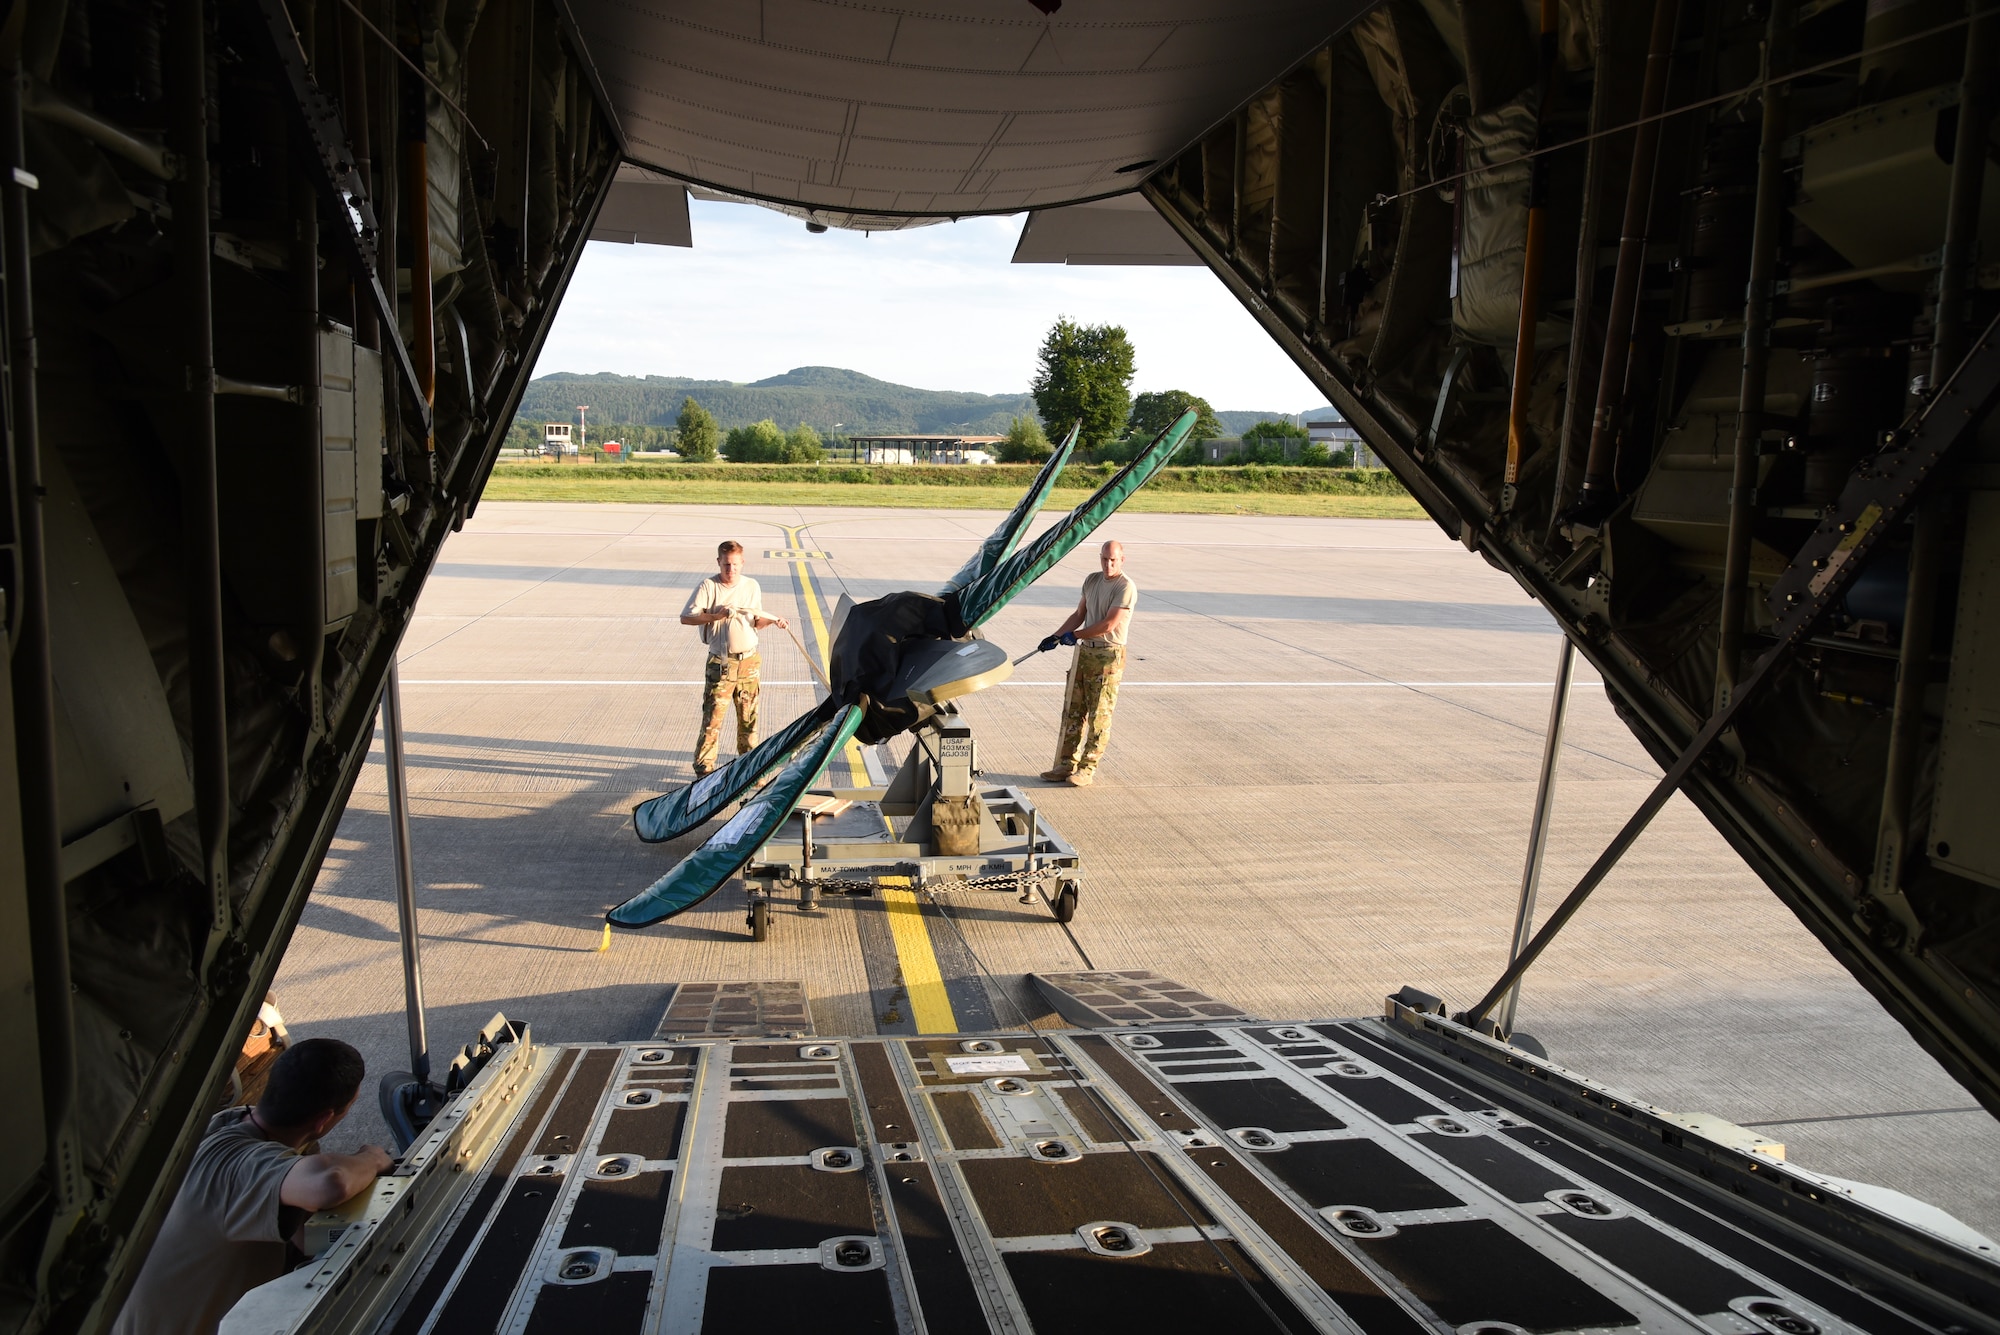 Senior Master Sgts. Eric Gassiott and John Kittrell, loadmasters for the 815th Airlift Squadron from the 403rd Wing, load a propeller onto the C-130J at the conclusion of exercise Swift Response 19, June 19, 2019. The exercise is one of the premier military crisis response training events featuring high readiness airborne forces from eight NATO nations. Activities include intermediate staging base operations, multiple airborne operations, and several air assault operations. The Swift Response exercises have had great success in creating a foundation for the strong relationships we share with several European allies and partners today. (U.S. Air Force photo by Master Sgt. Jessica Kendziorek)